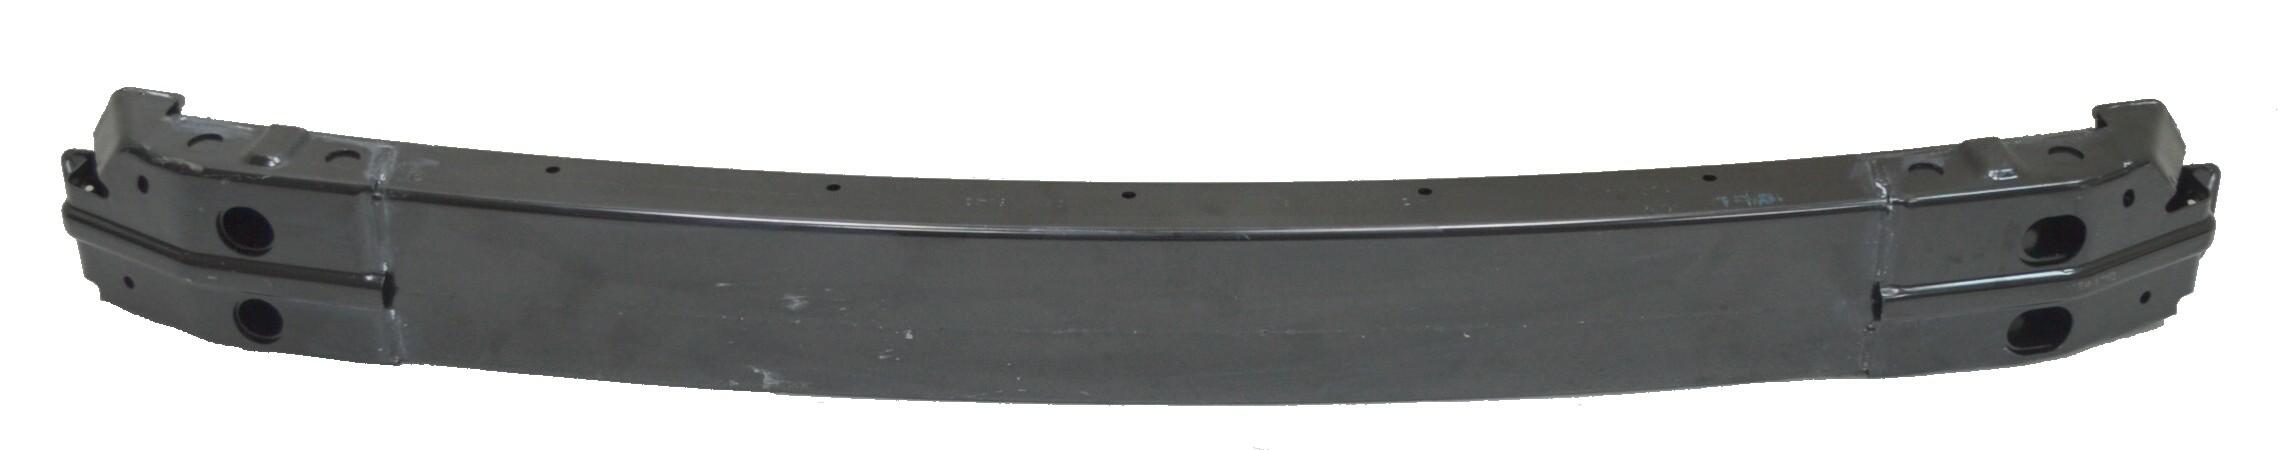 Aftermarket REBARS for TOYOTA - COROLLA, COROLLA,14-16,Front bumper reinforcement